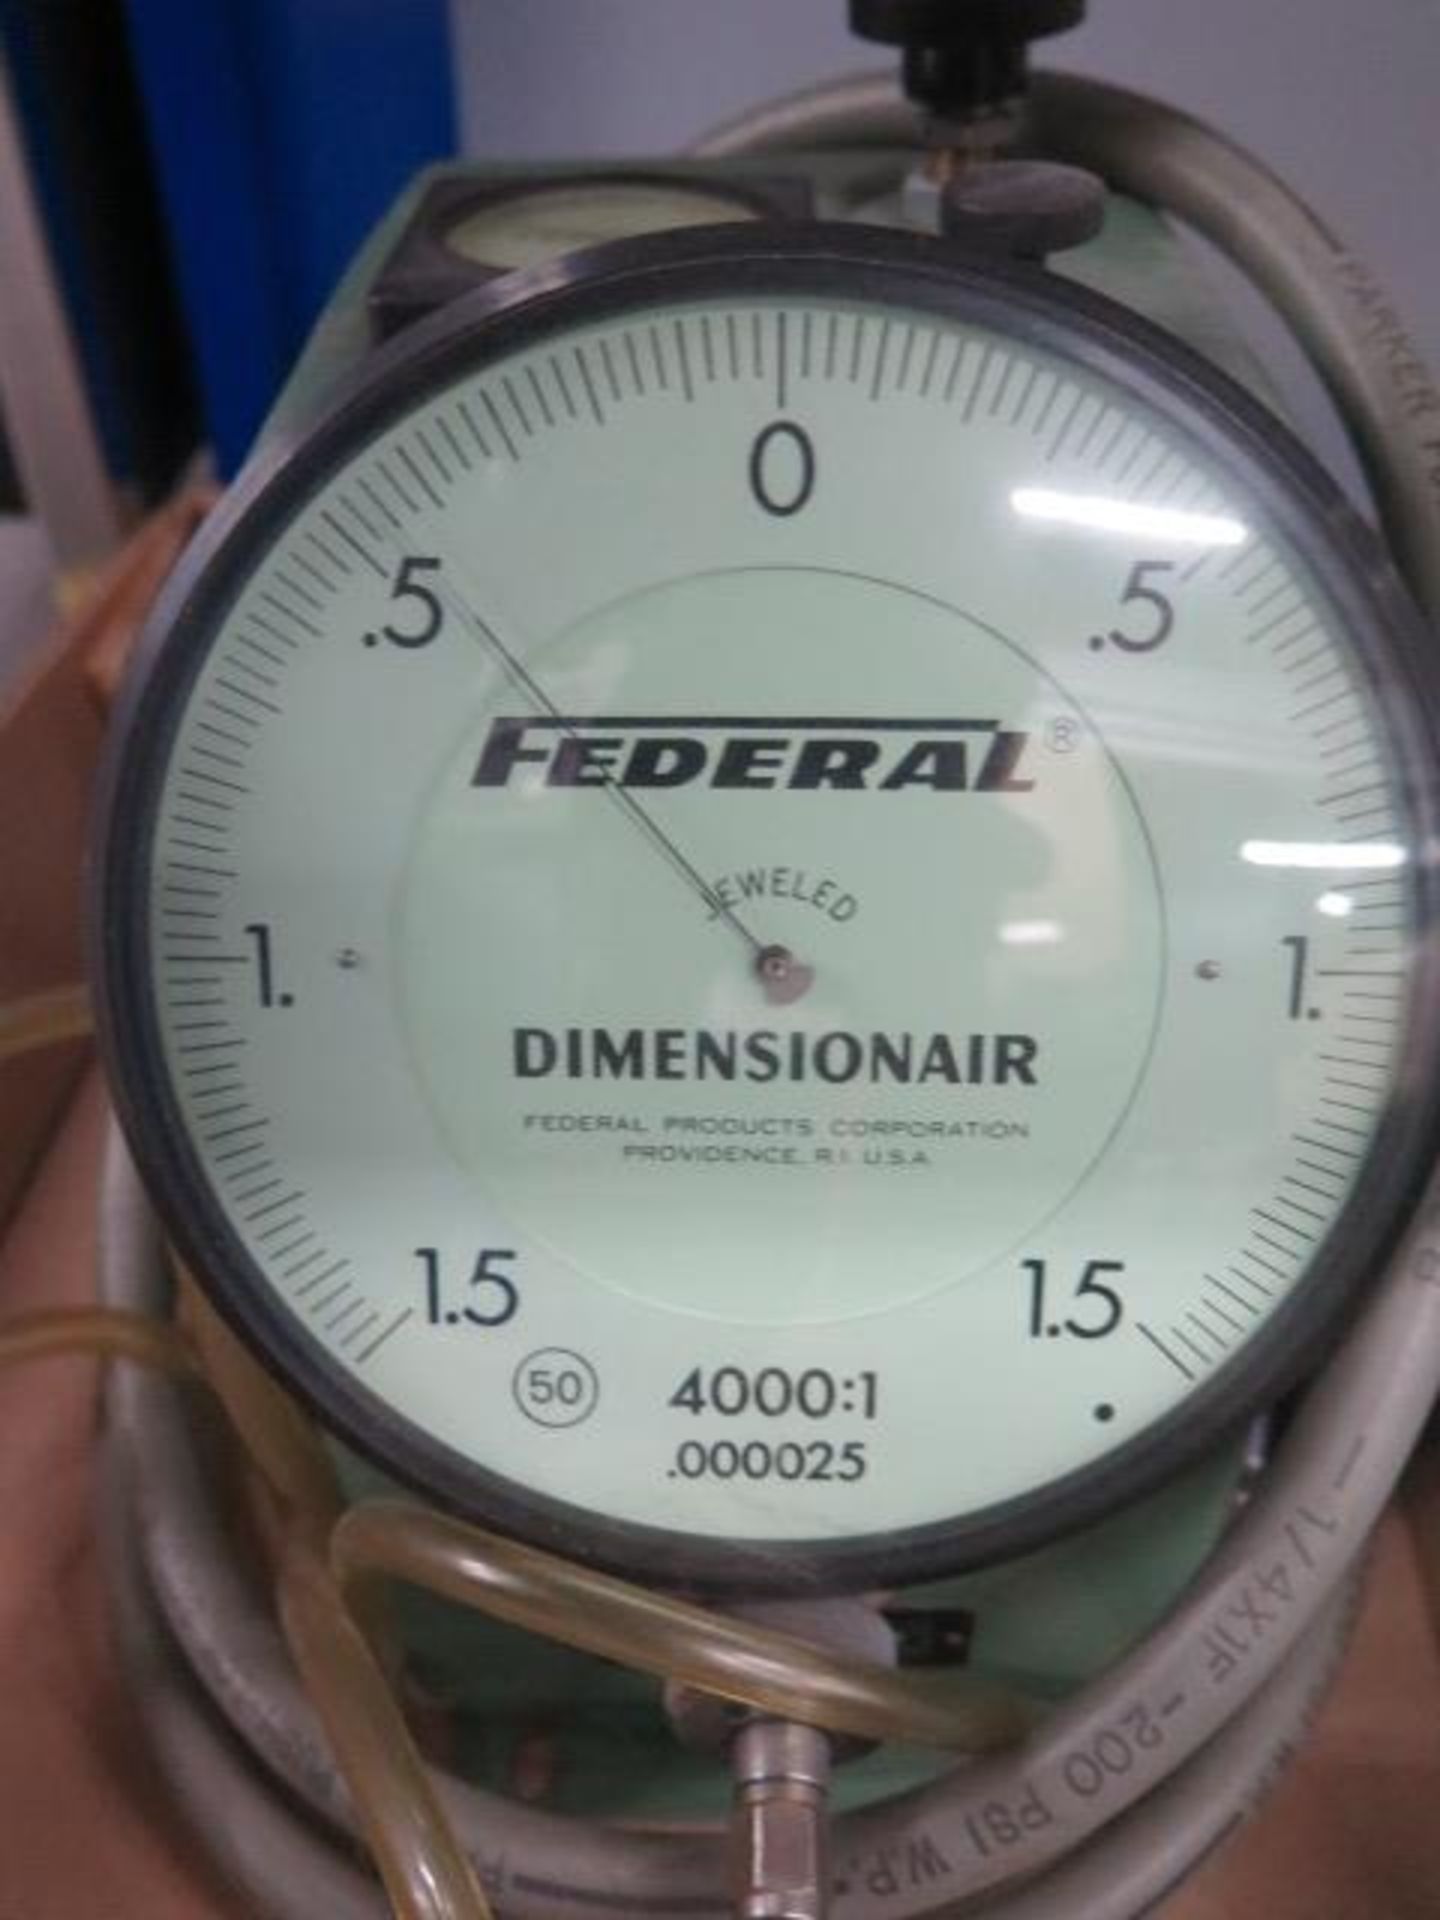 Federal Dimensionair Air Bore Gage (SOLD AS-IS - NO WARRANTY) - Image 4 of 4